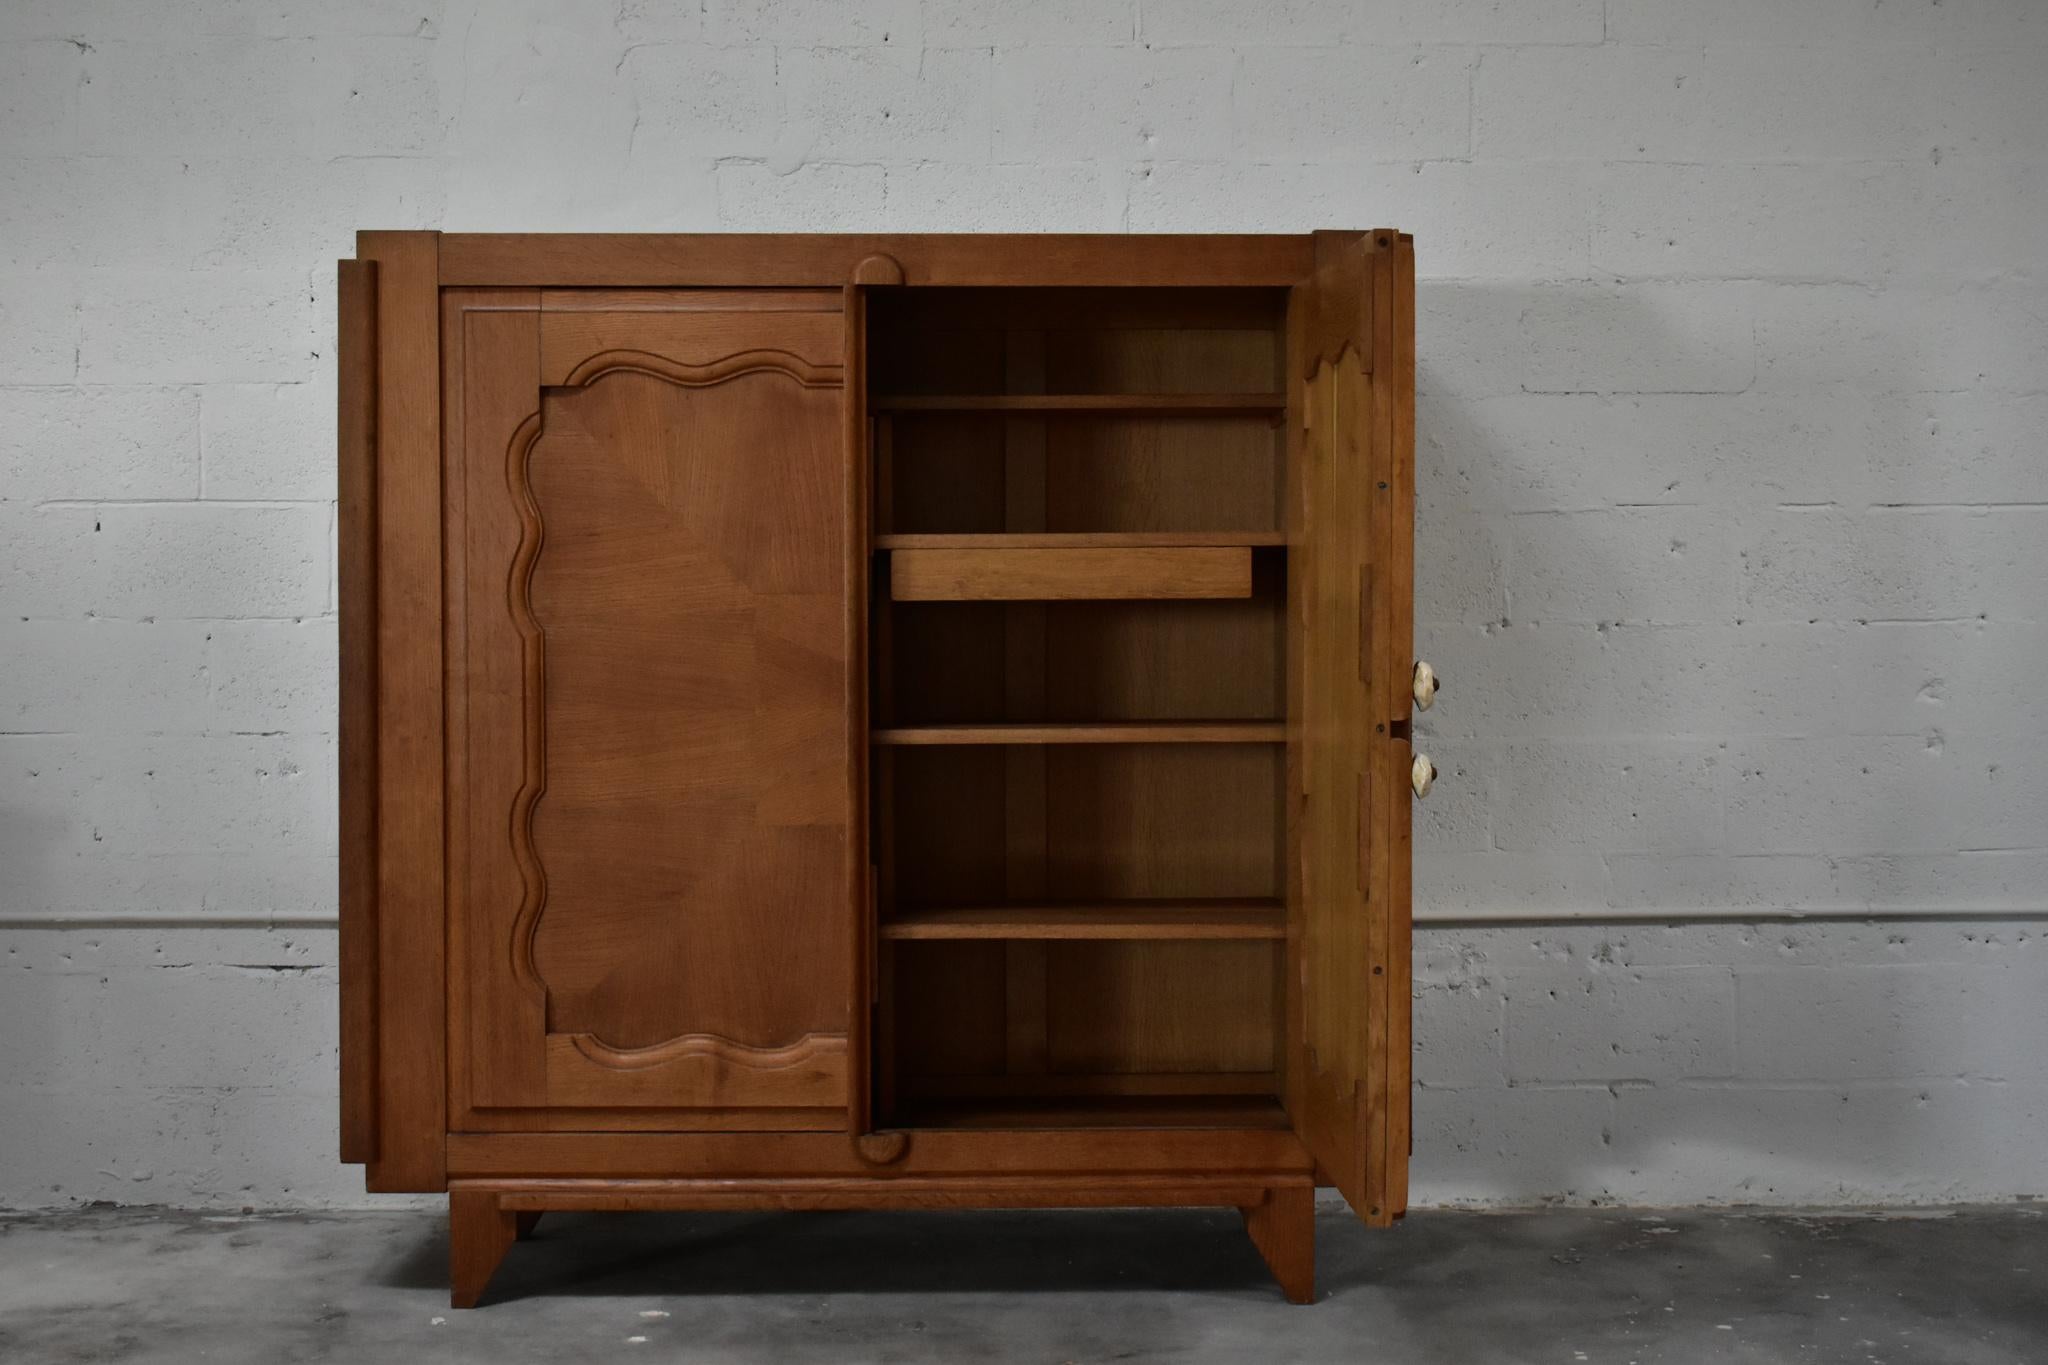 Guillerme et Chambrone for Votre Maison, France 1960’s 

This highboard was designed by Robert Guillerme and Jacquese Chambron. Renowned for their craftsmanship and functionality, this wardrobe features two symmetrical carved oak doors followed by